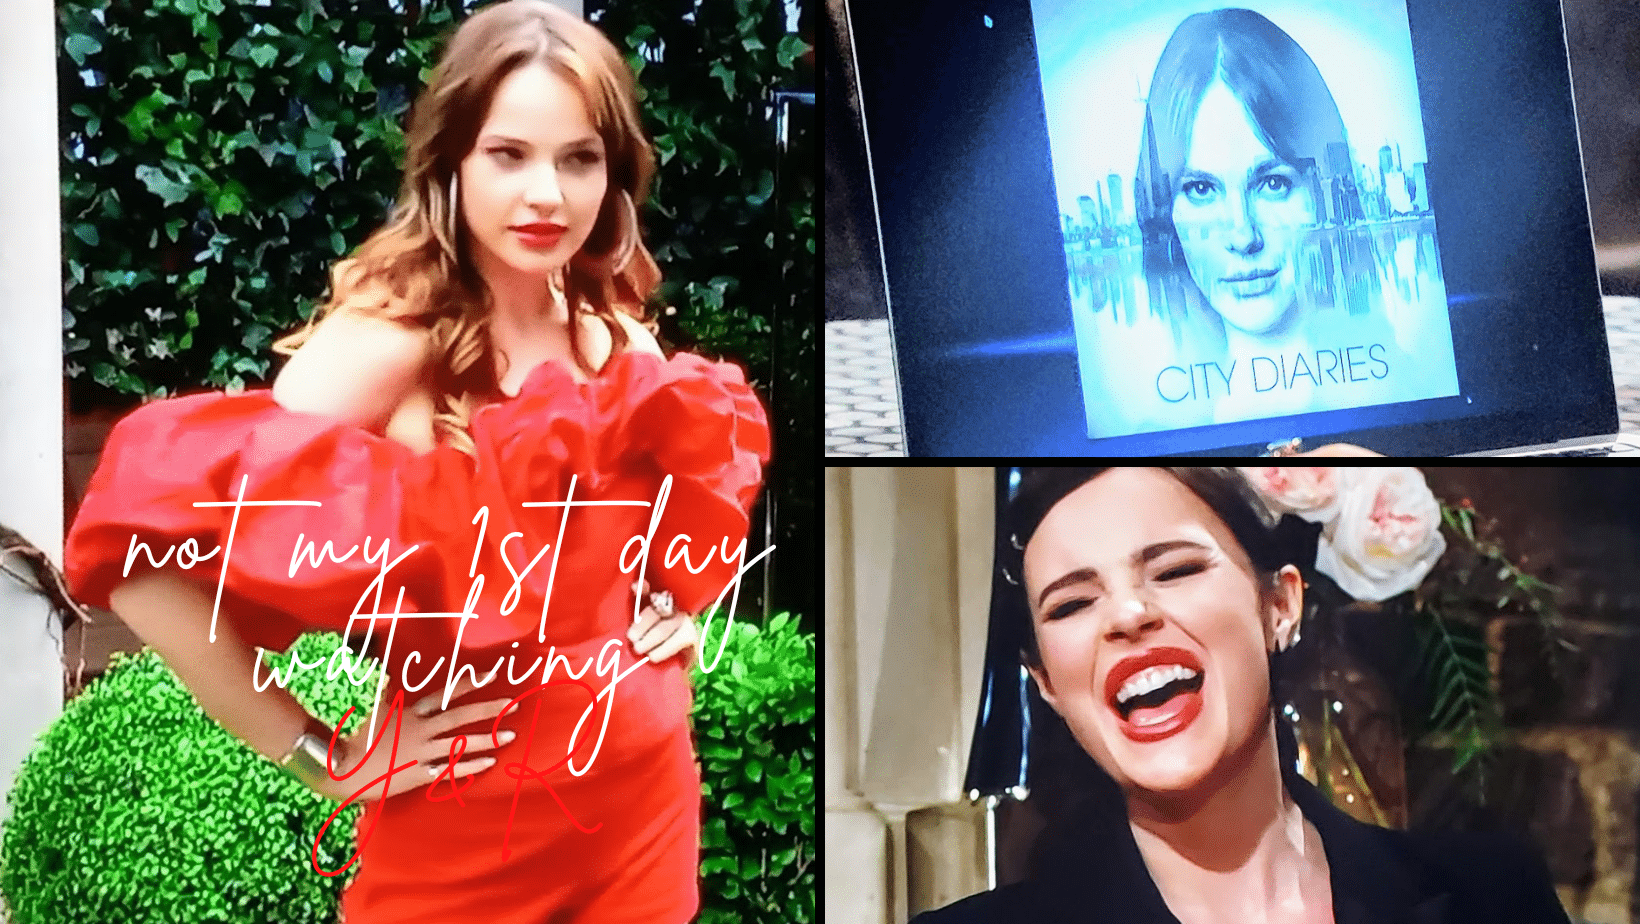 Tessa Porter’s Singing Career, Paused For Now on Y&R